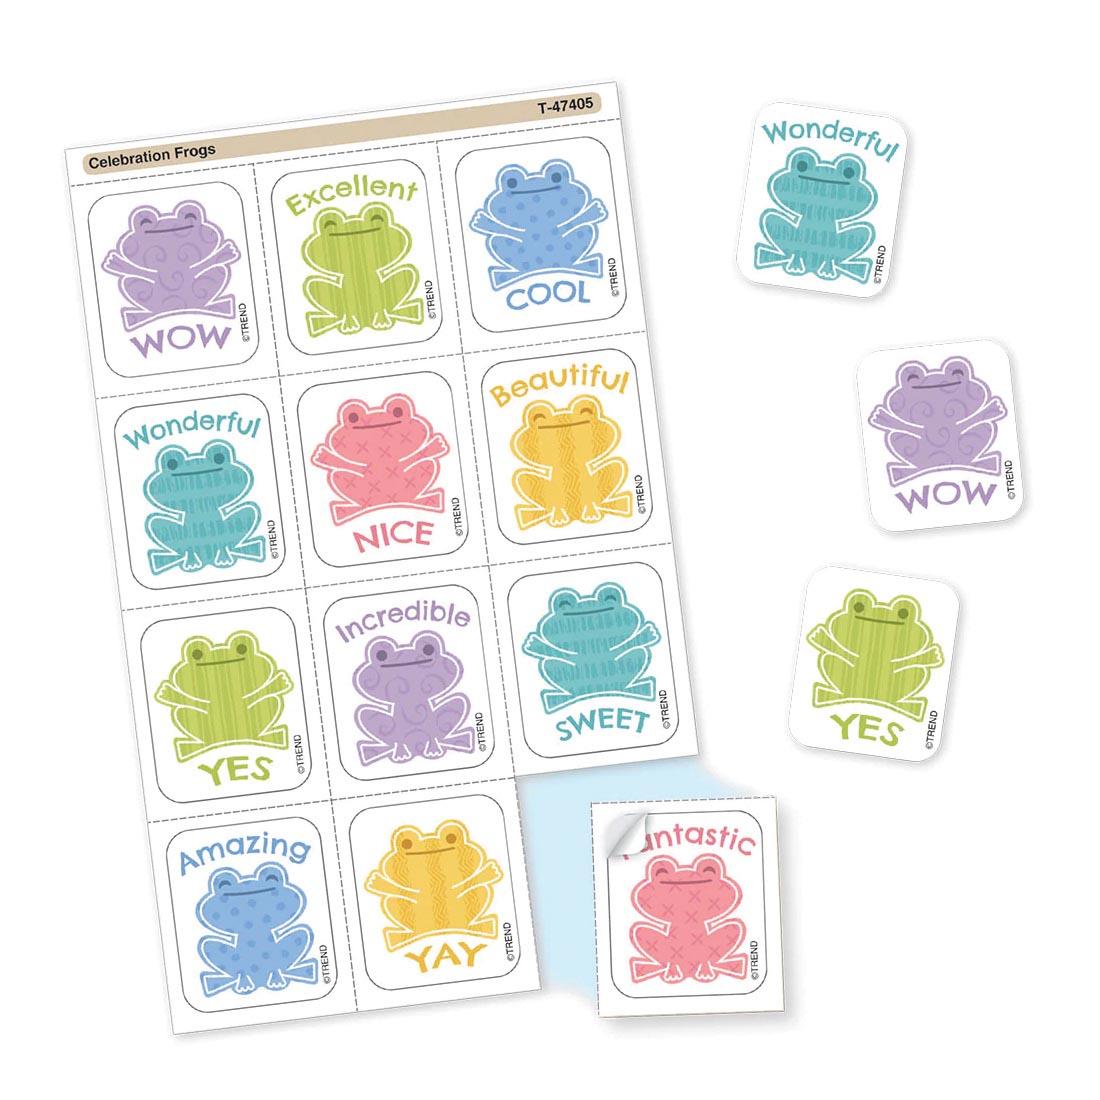 Celebration Frogs Tear & Share Stickers from the Good To Grow collection by TREND